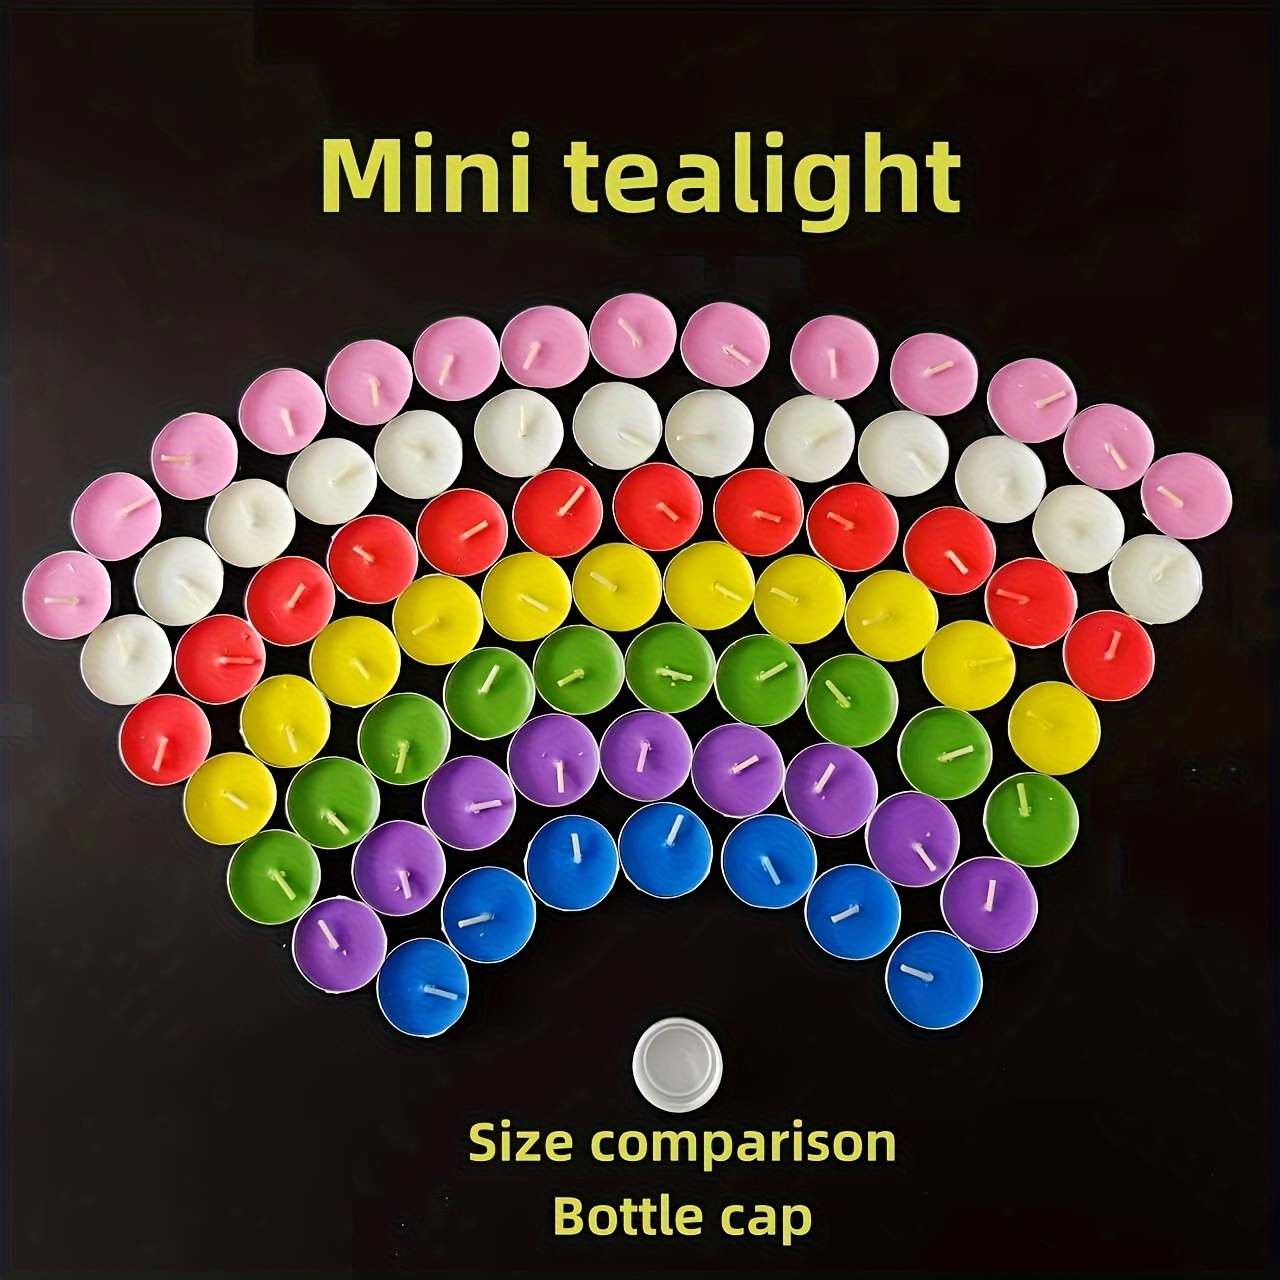 

50-piece Romantic Tealight Candles - Unscented, Dripless & Long-lasting Smokeless Mini Lights For Mood Enhancement, Home Decor, Weddings, Crafts & More